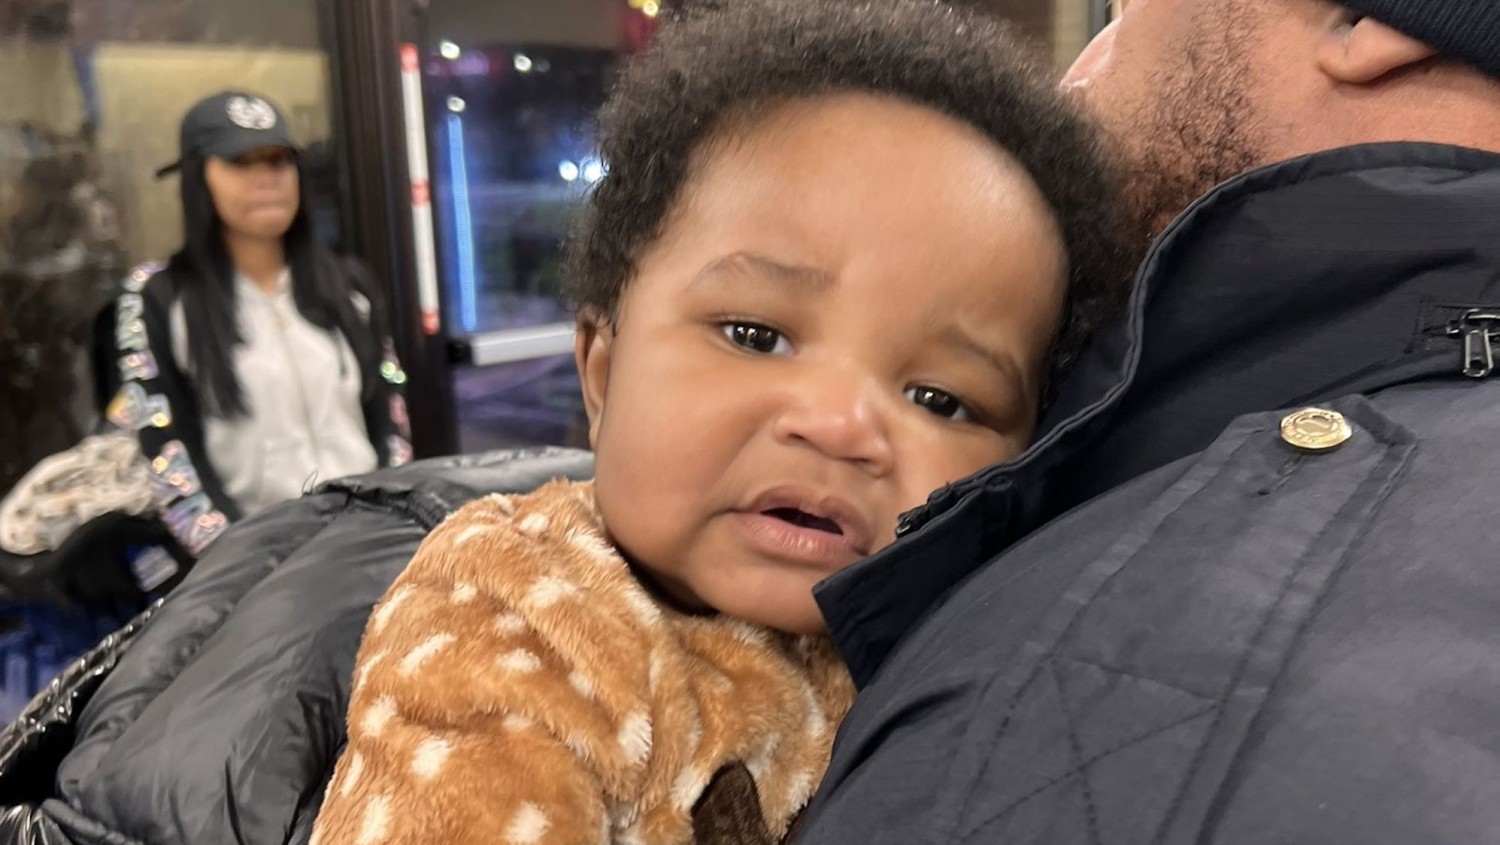 IMPD/Twitter | Police officers in Indianapolis unexpectedly discovered baby Kason Thomass in the parking lot of a shopping mall where they had stopped to eat.